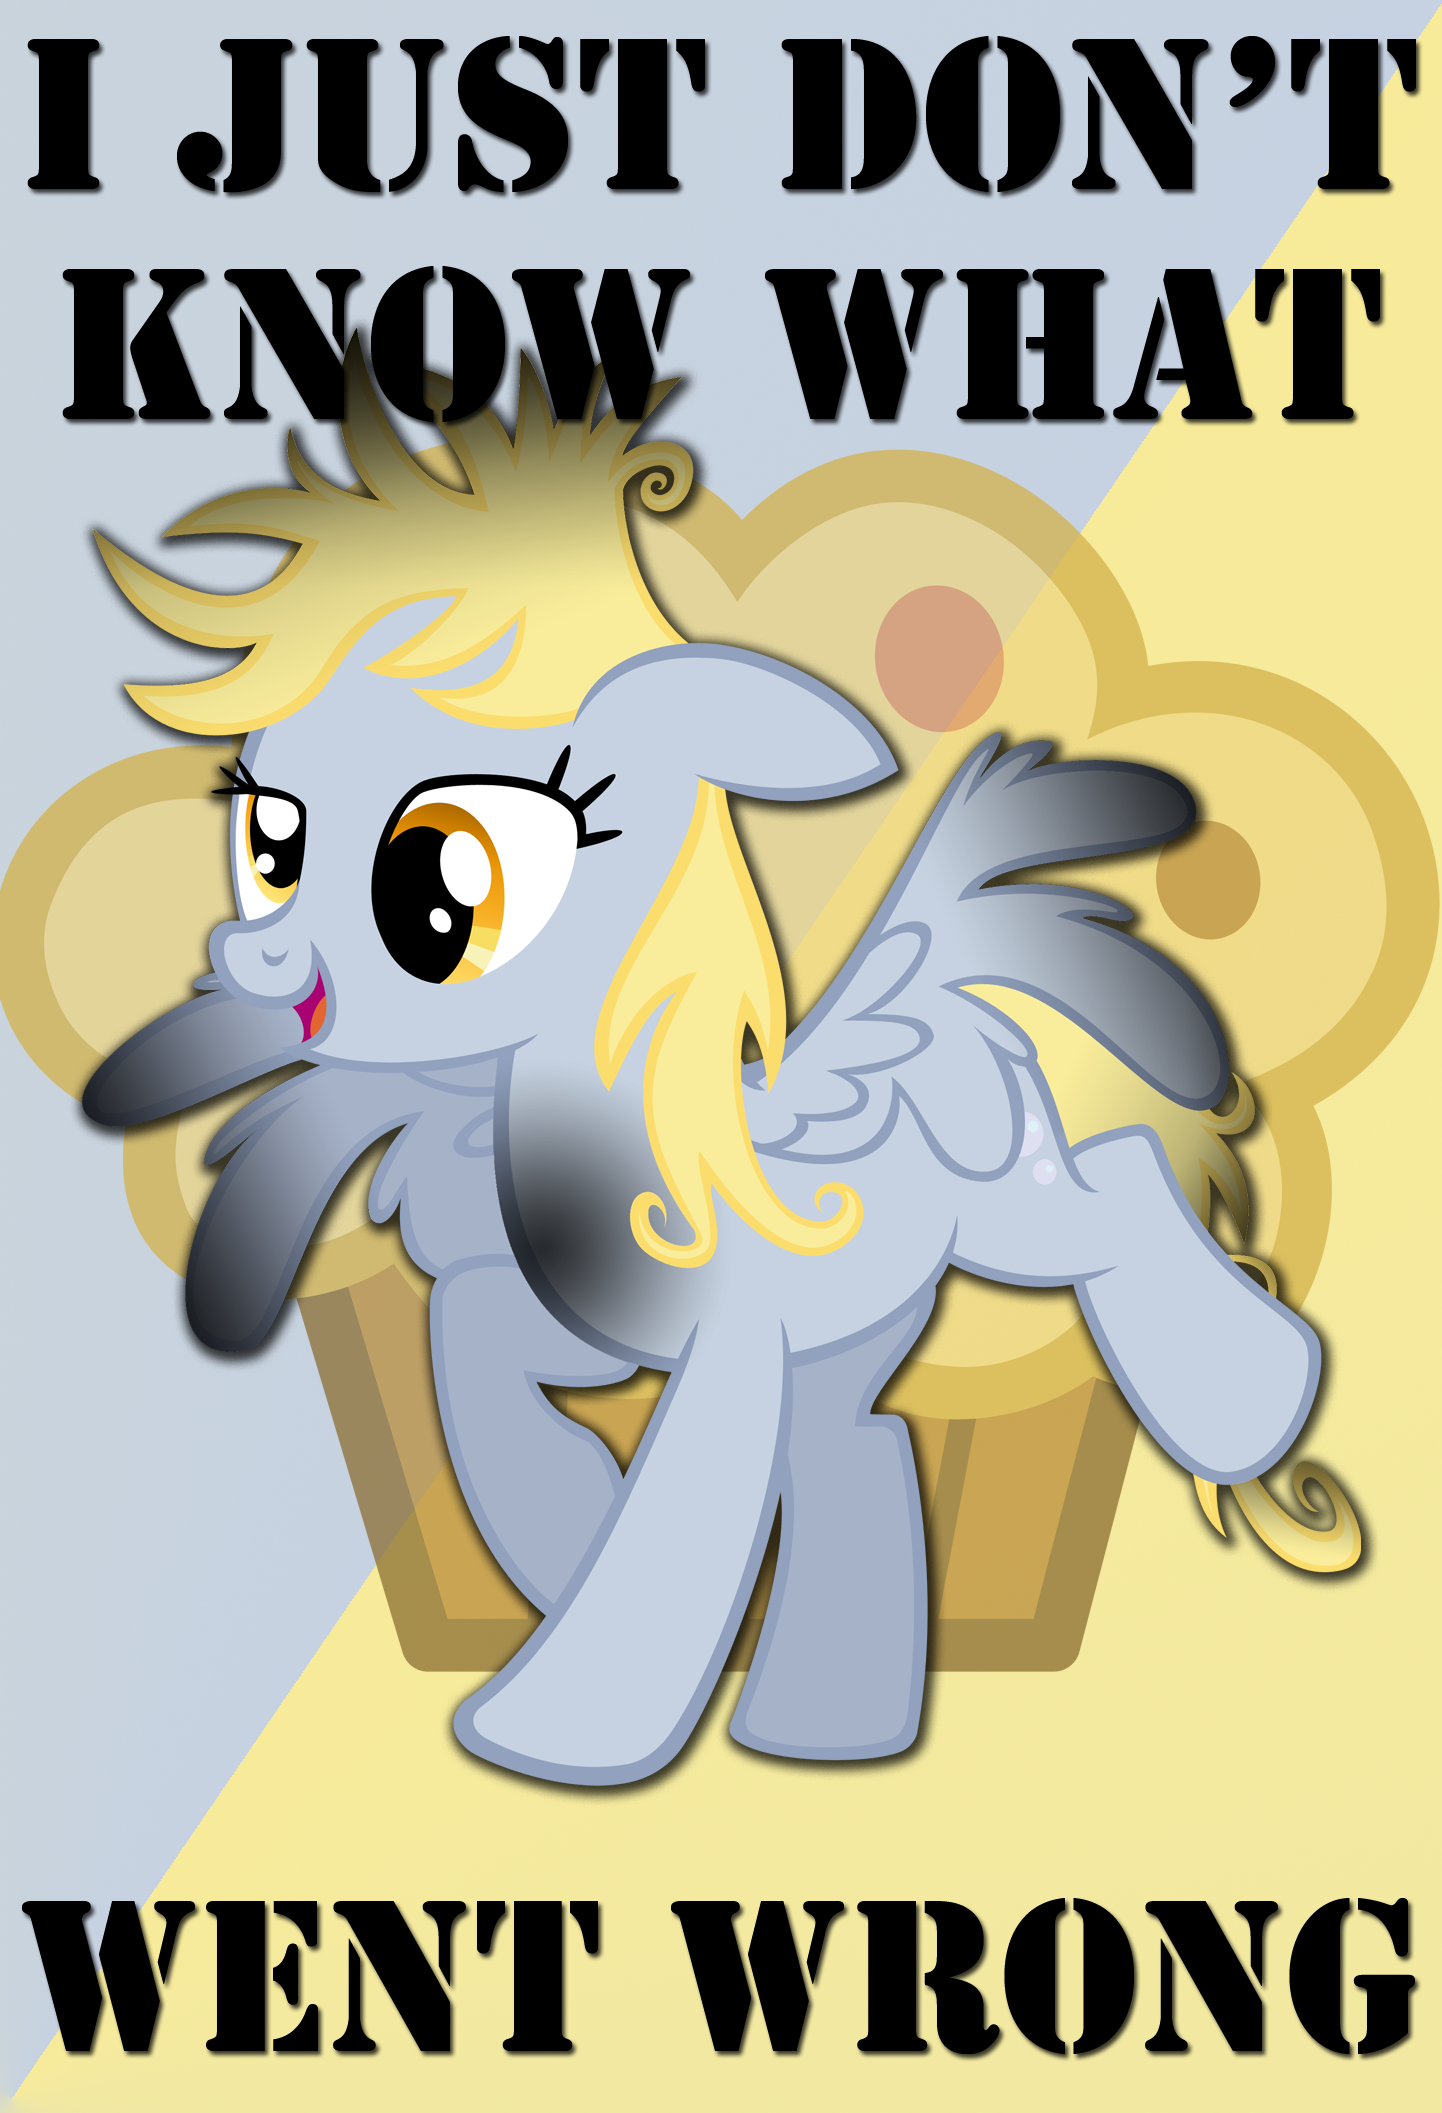 I JUST DON'T KNOW WHAT WENT WRONG- Derpy WP by Rochambo